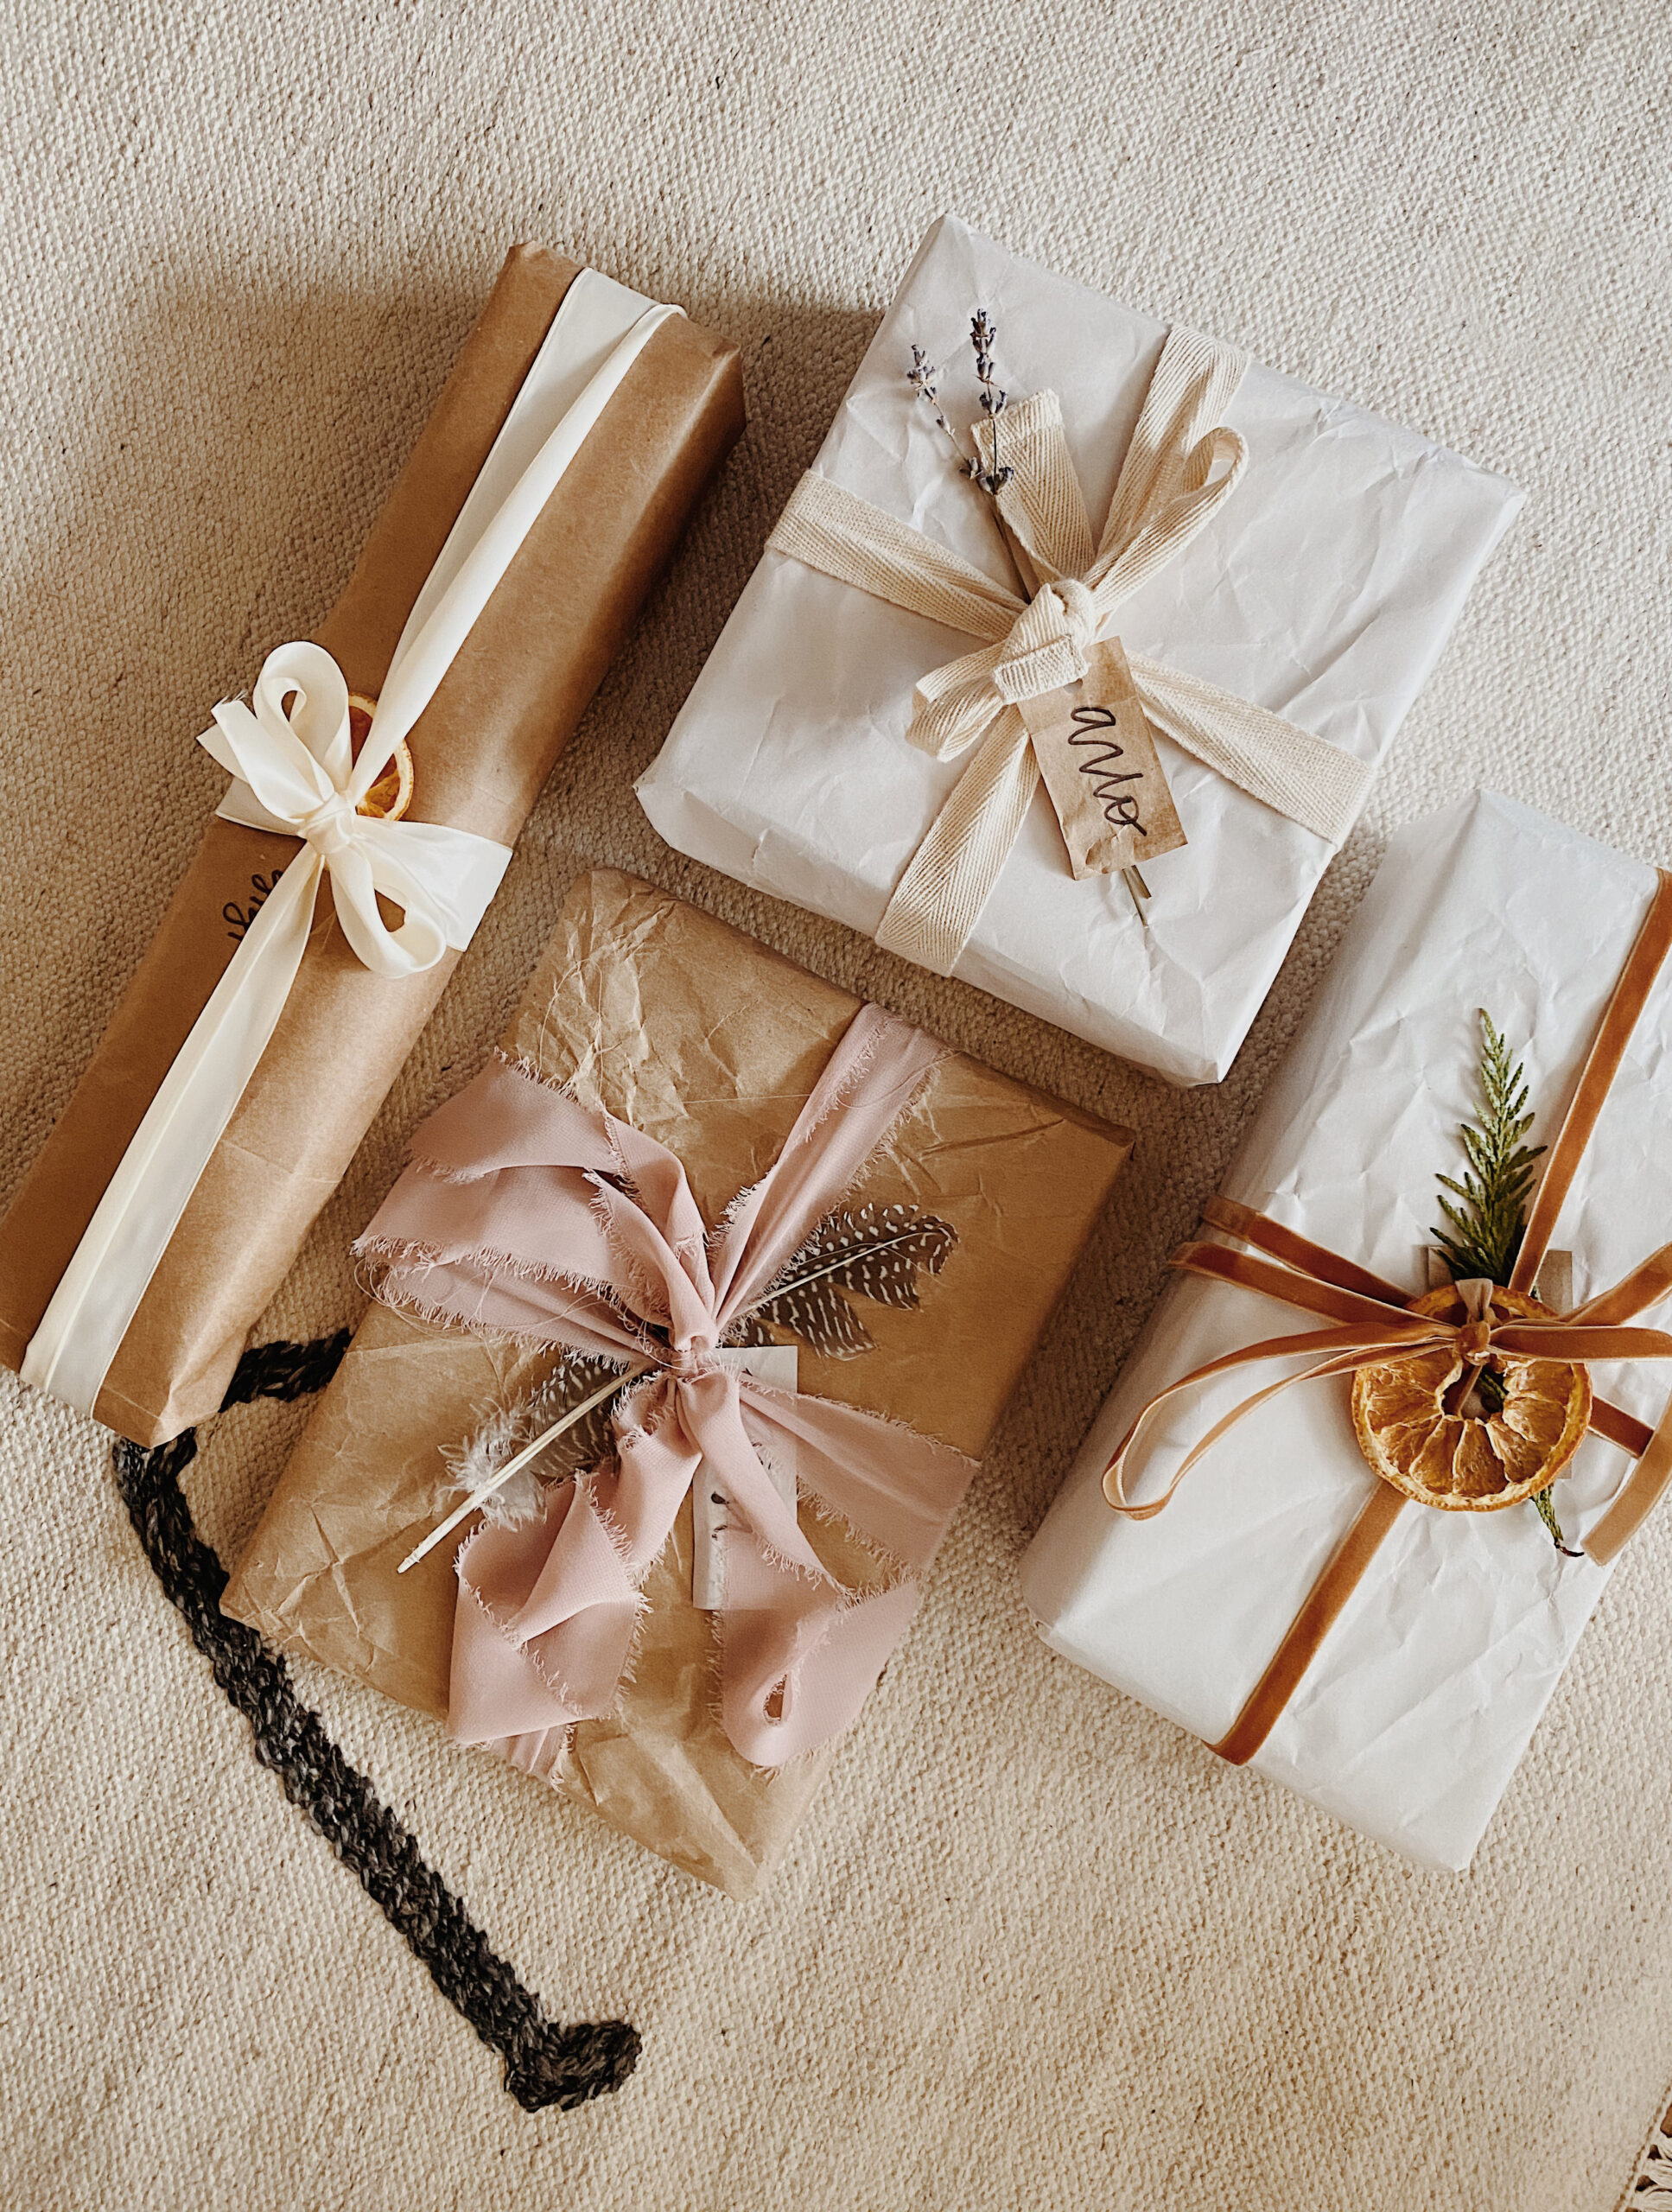 Present Wrapping Craft Creative Idea Boxes Design Stock Photo - Image of  holiday, copyspace: 107222122